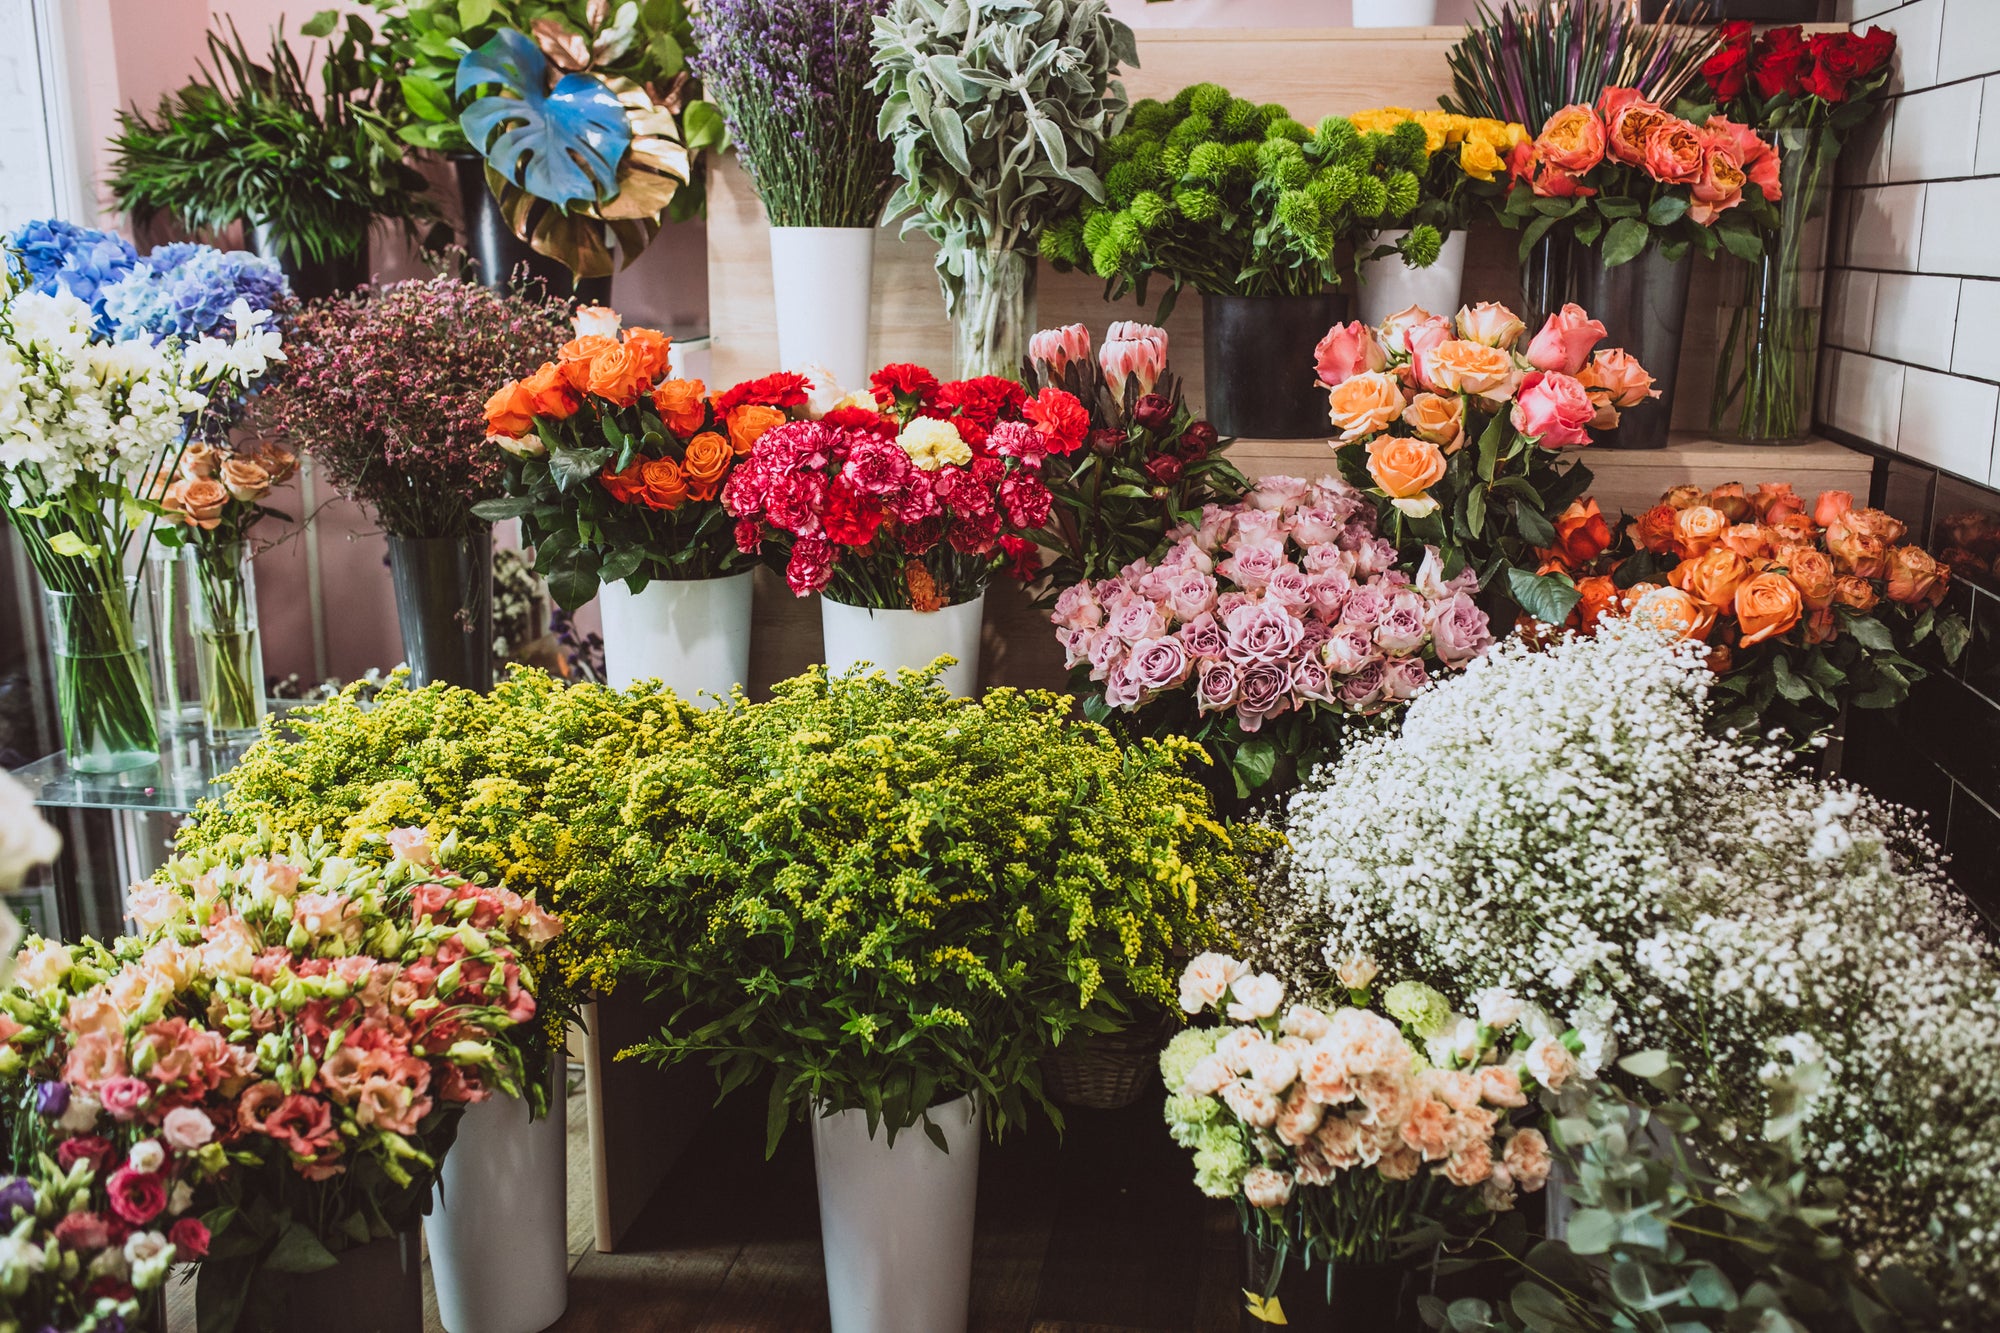 HOW TO BUY FLOWERS ONLINE – 5 ESSENTIAL TIPS